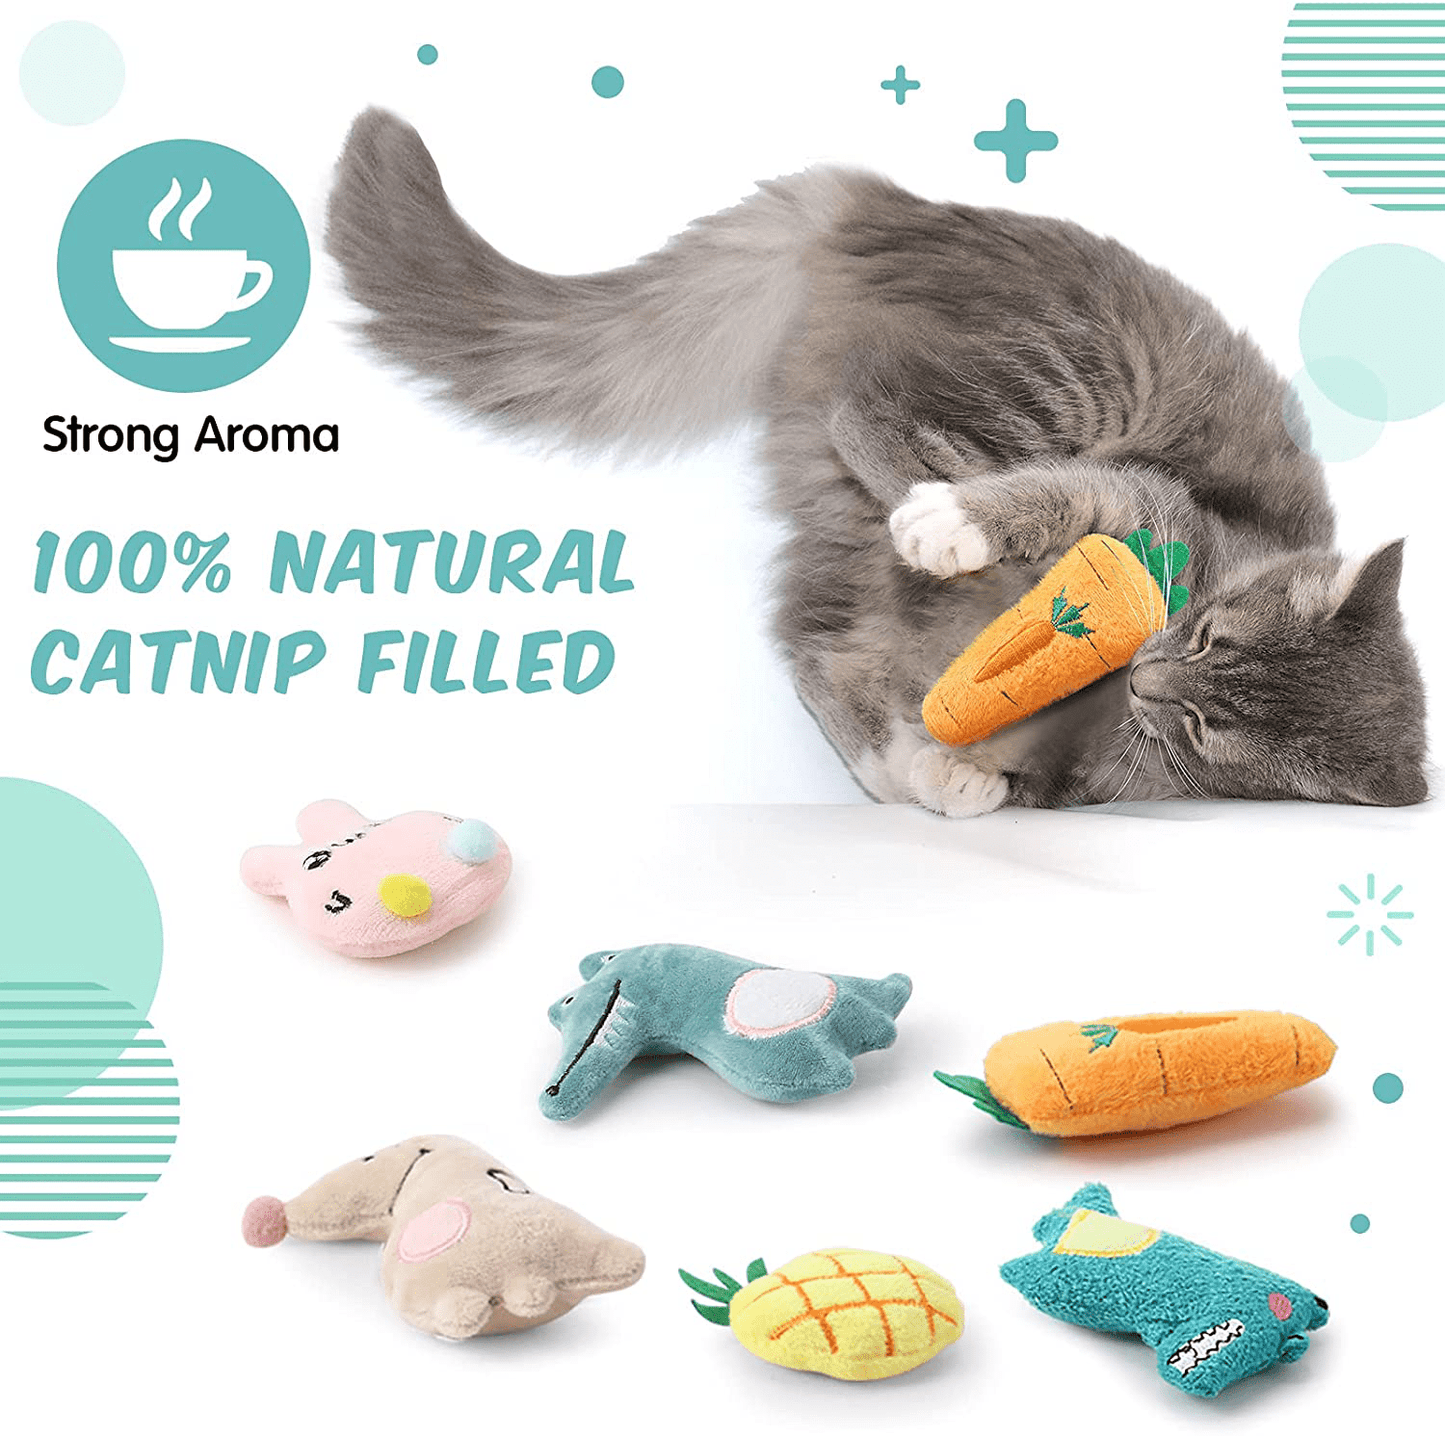 20 Pieces Catnip Toys for Indoor Cat Plush Cat Chew Toys Cute Kitten Catnip Toys Cat Pillow Toys Kitten Entertaining Toys Interactive Cat Toys in 20 Different Cute Shapes Design for Cat Kitten Kitty